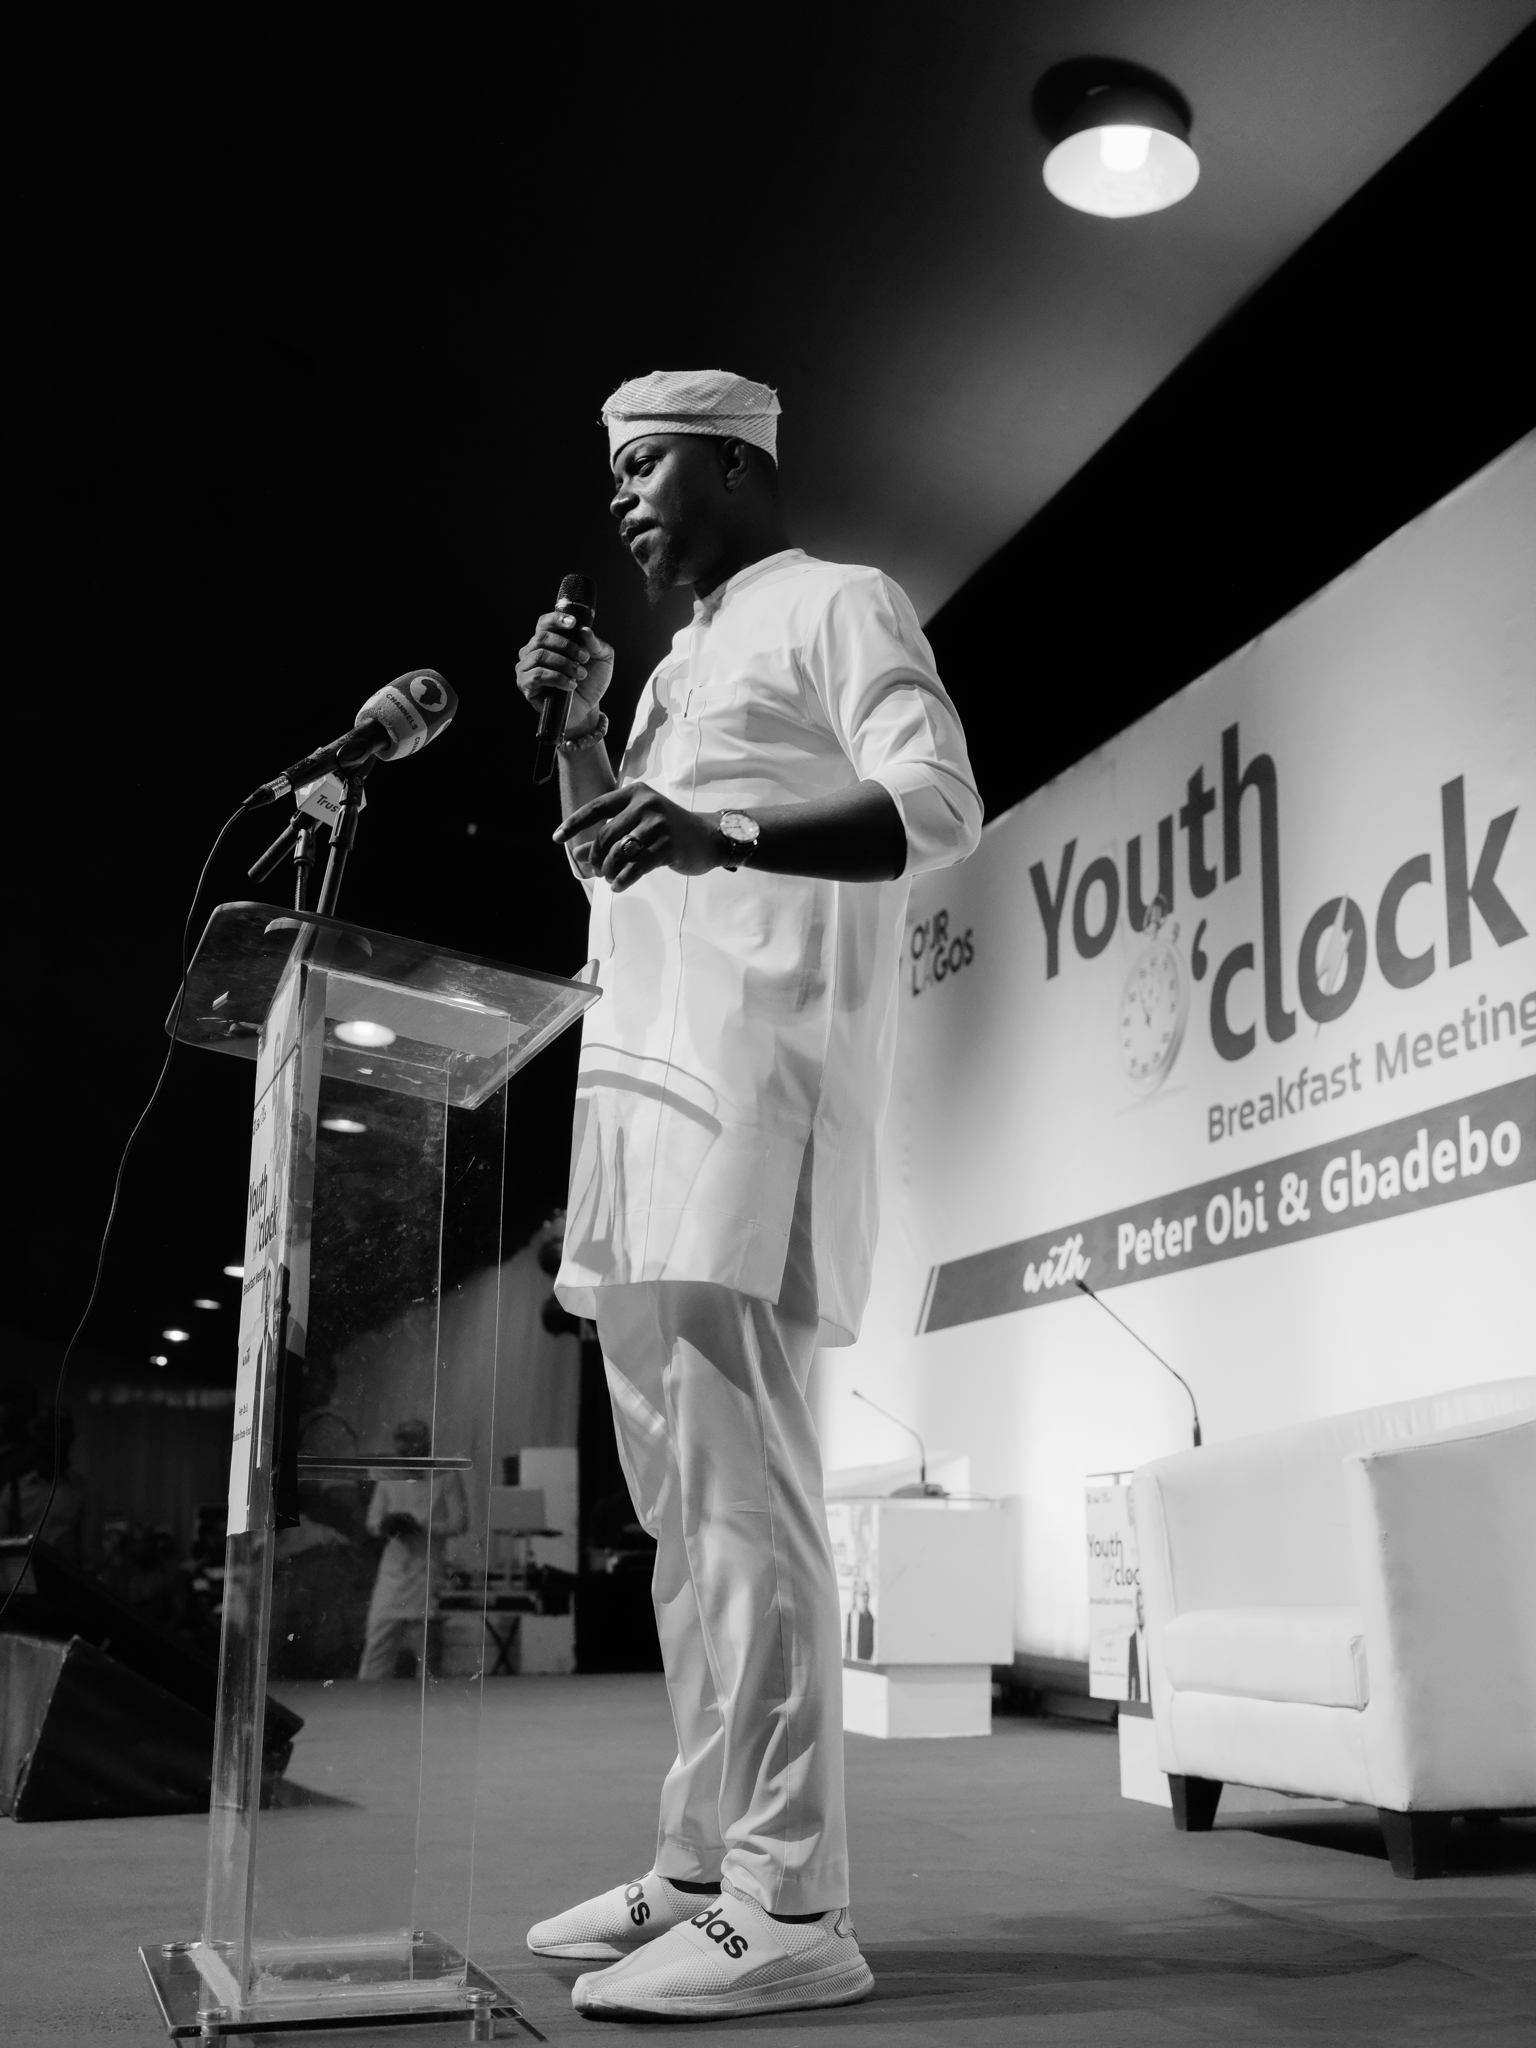 Documentary  - [NIGERIA] Youth O'Clock: Breakfast Meeting with Peter Obi and Gbadebo Rhodes-Vivour